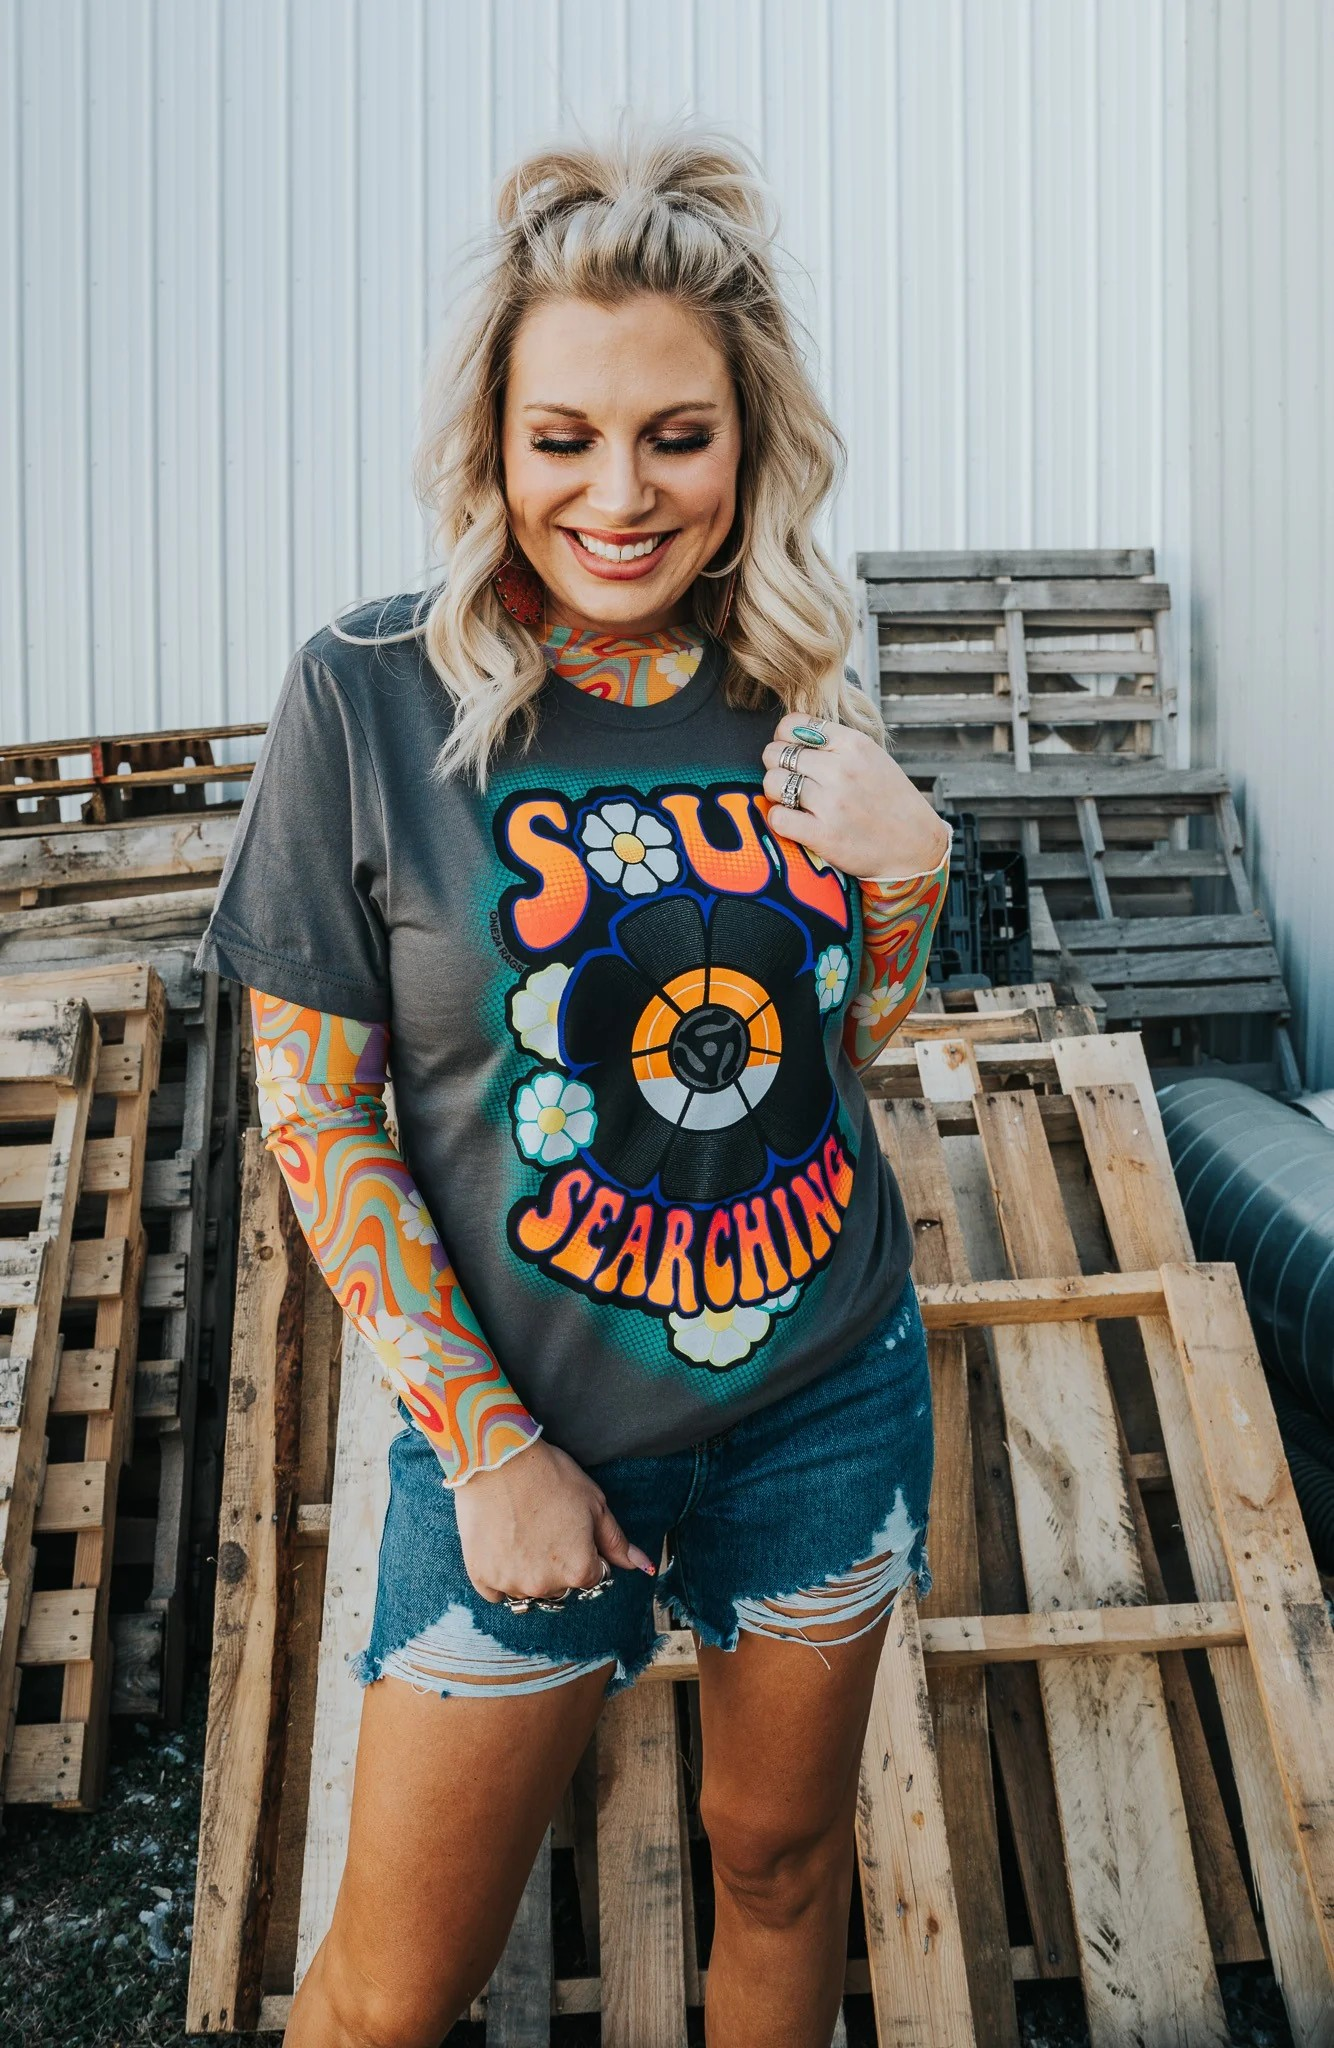 Soul Searching Graphic Tee / Stuffology Boutique-Graphic Tees-One24 Rags-Stuffology - Where Vintage Meets Modern, A Boutique for Real Women in Crosbyton, TX